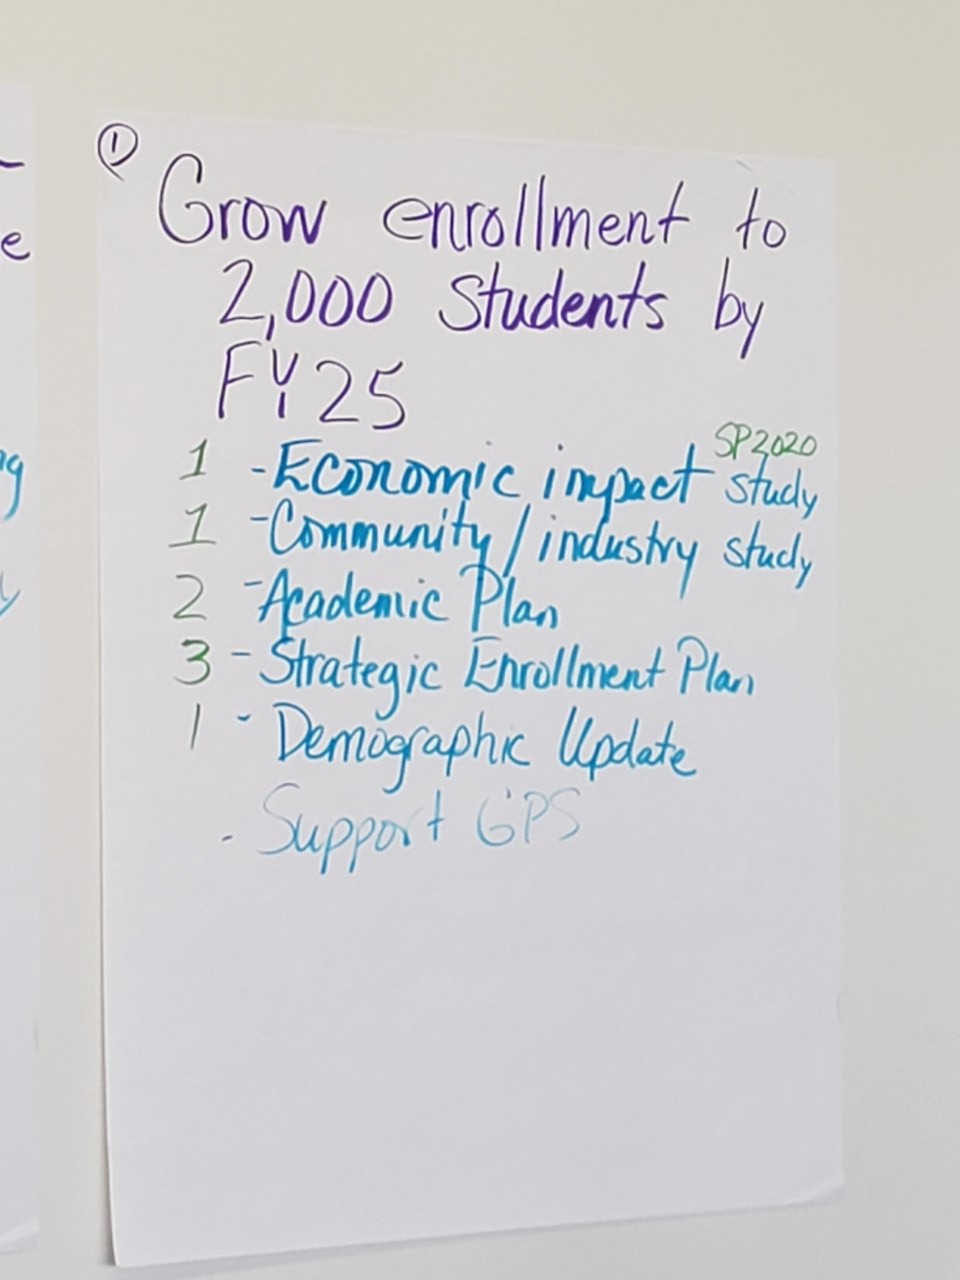 Large presentation post-it on a wall with handwritten notes about enrollment growth